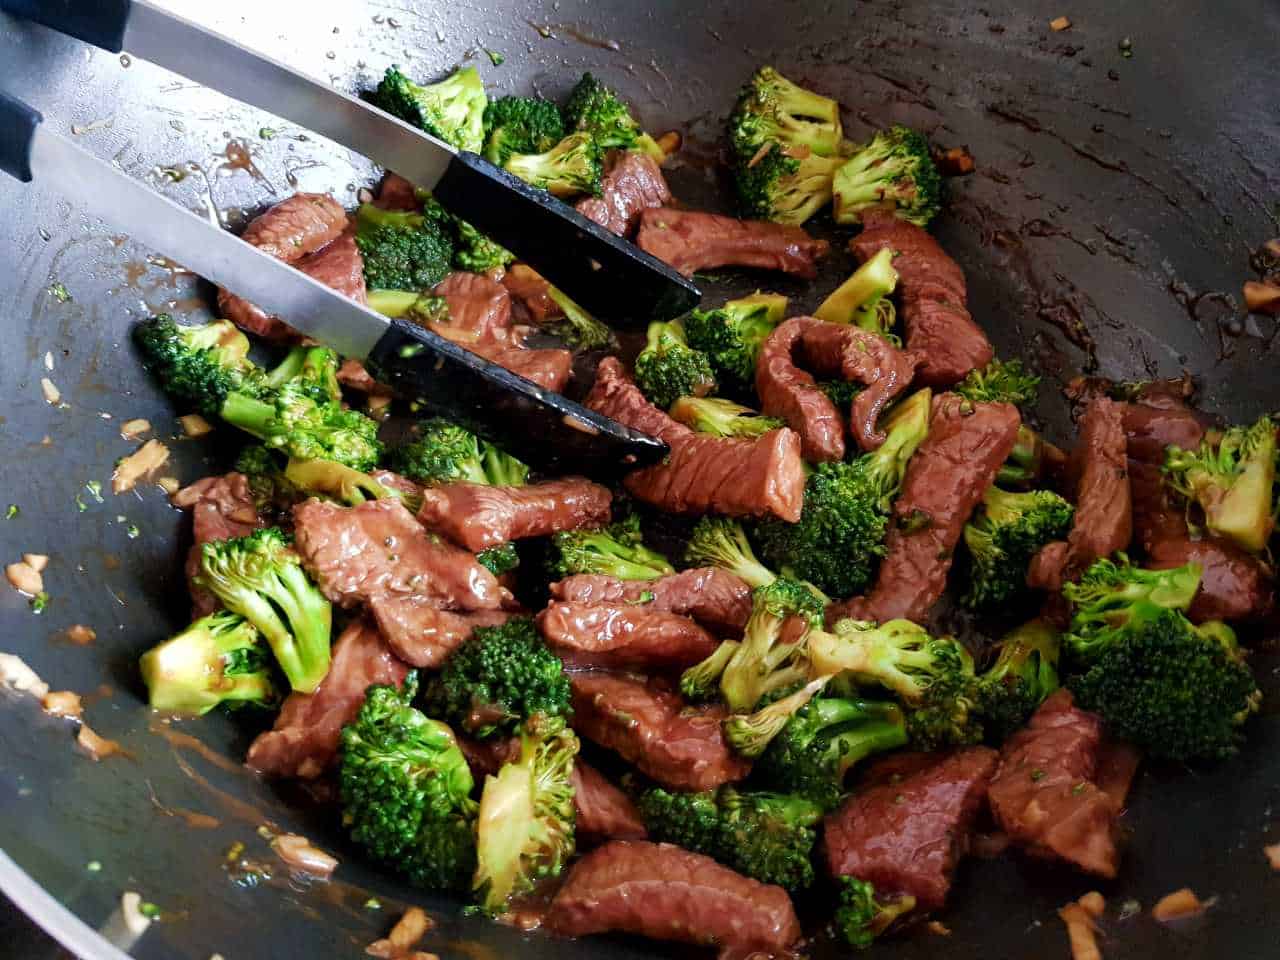 Broccoli and beef stir fry in a wok.